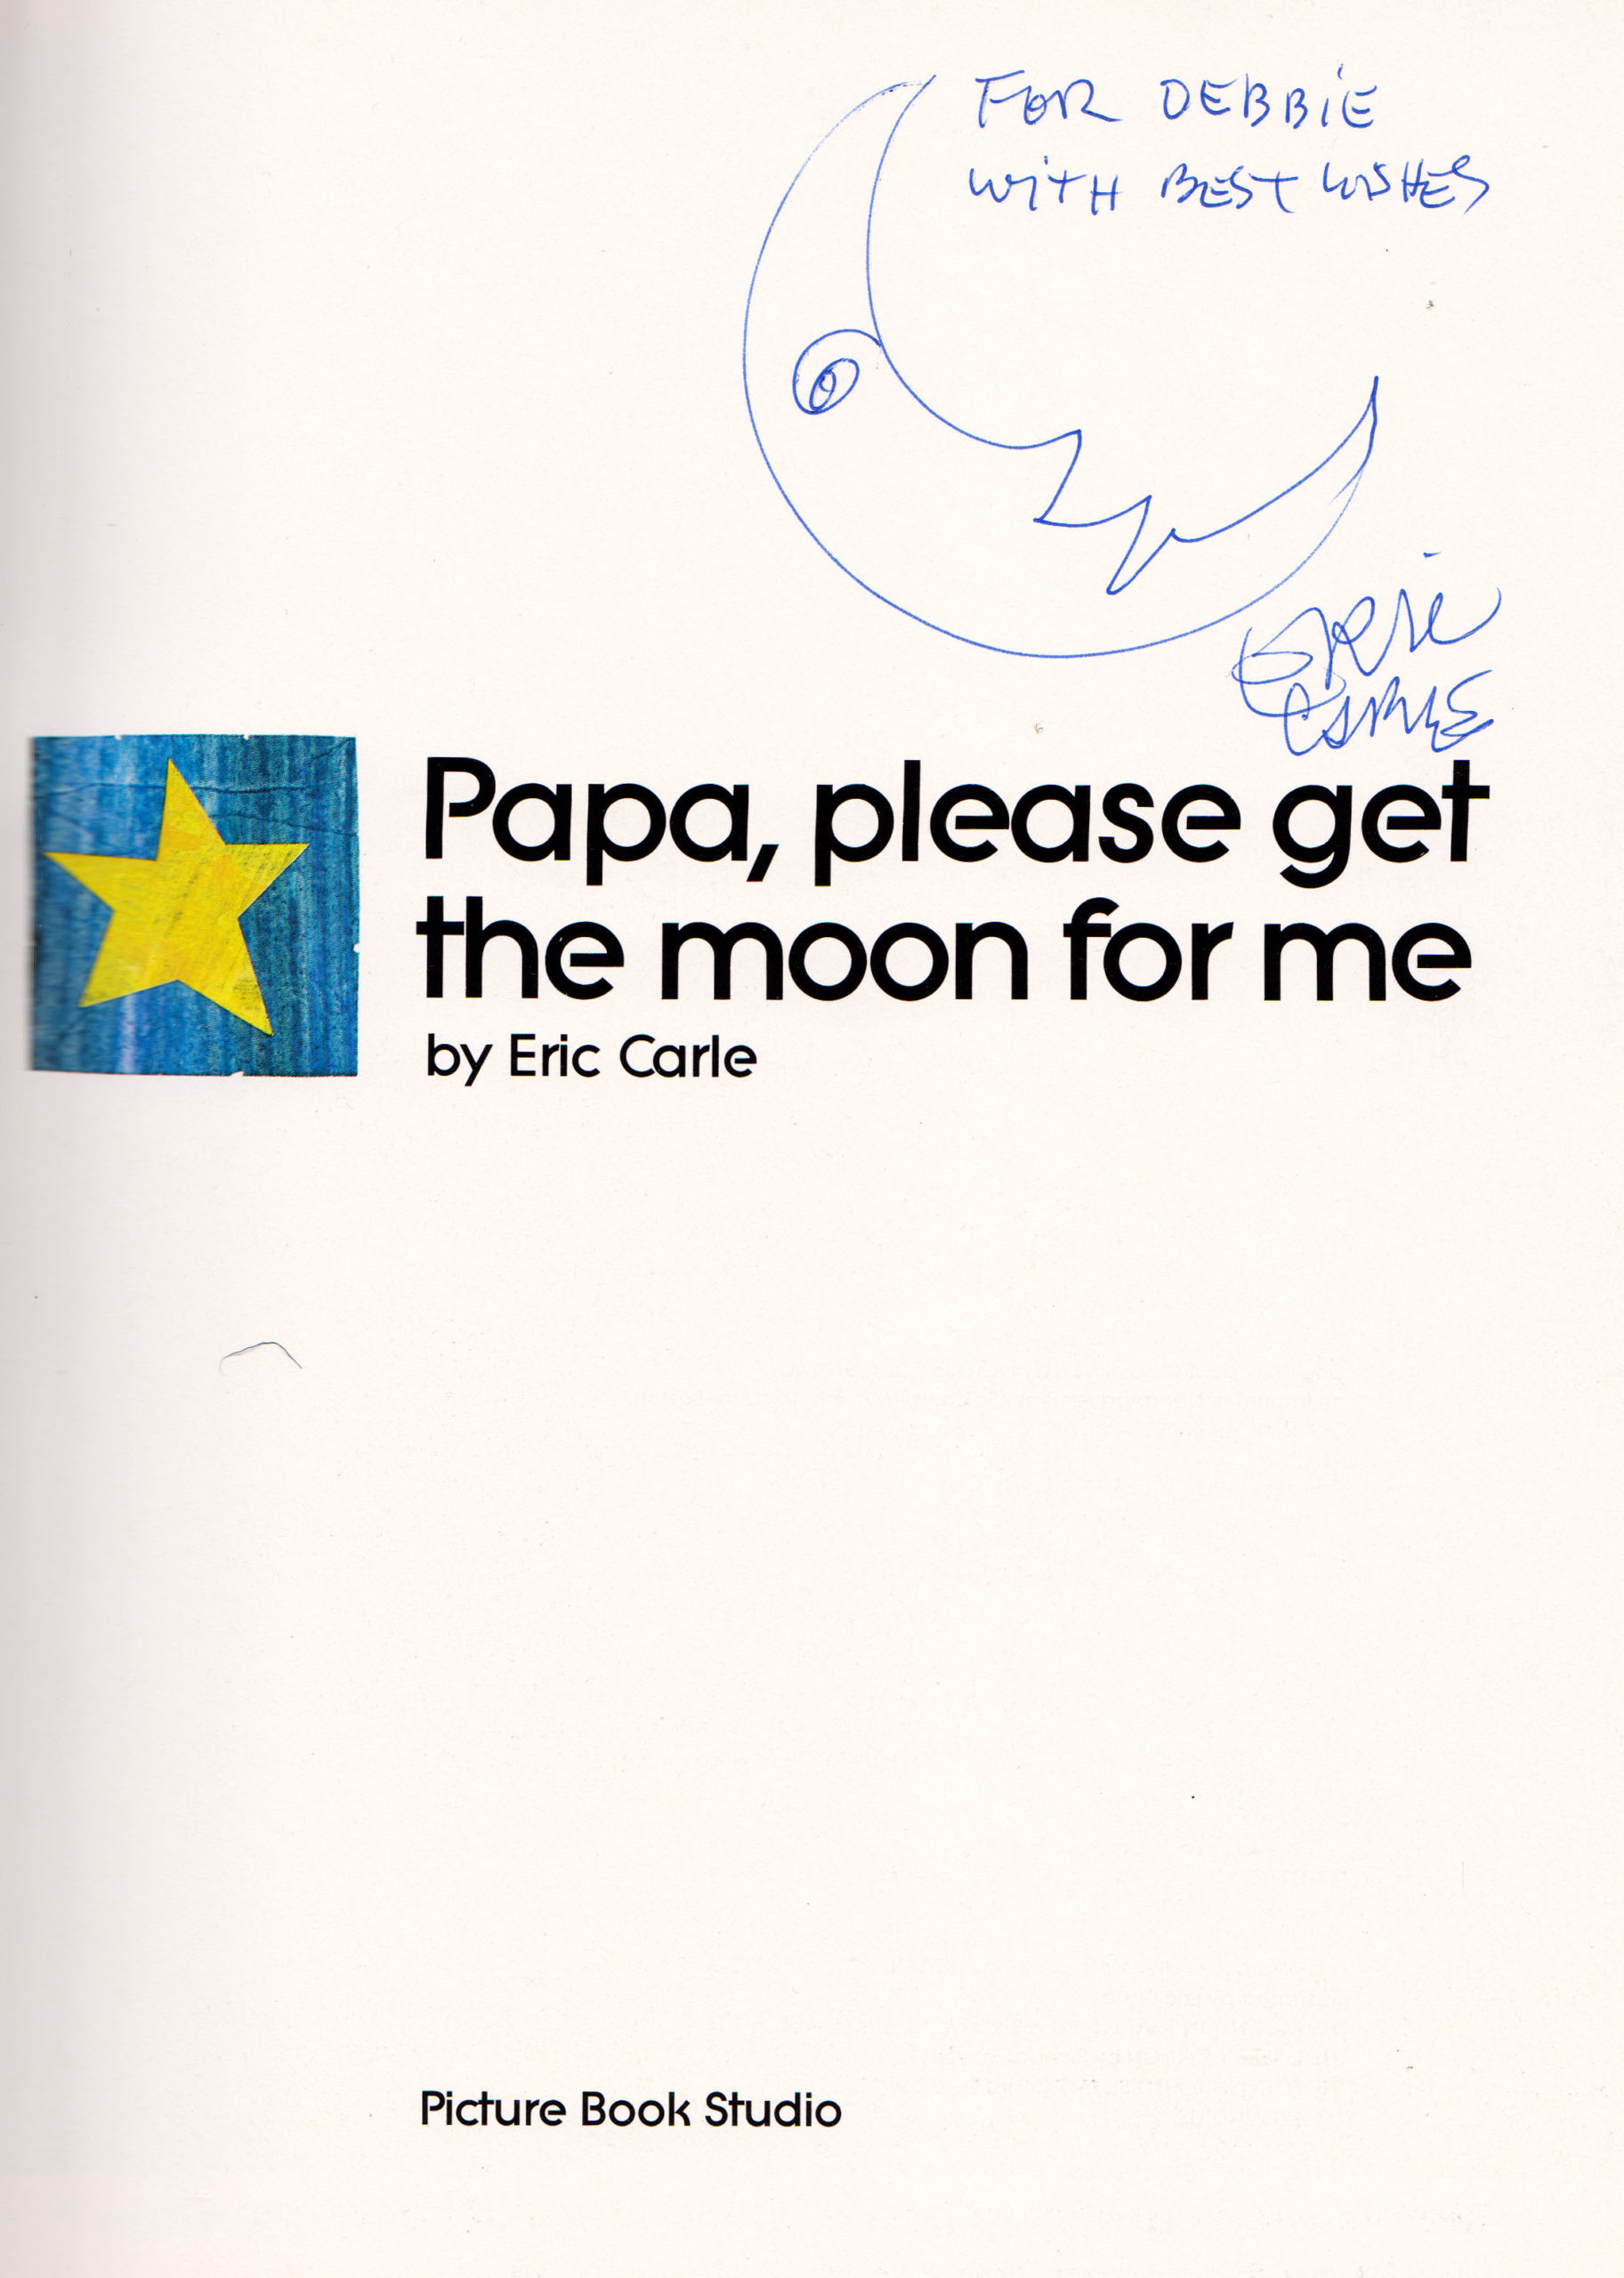 The Art of Eric Carle – R. MICHELSON GALLERIES